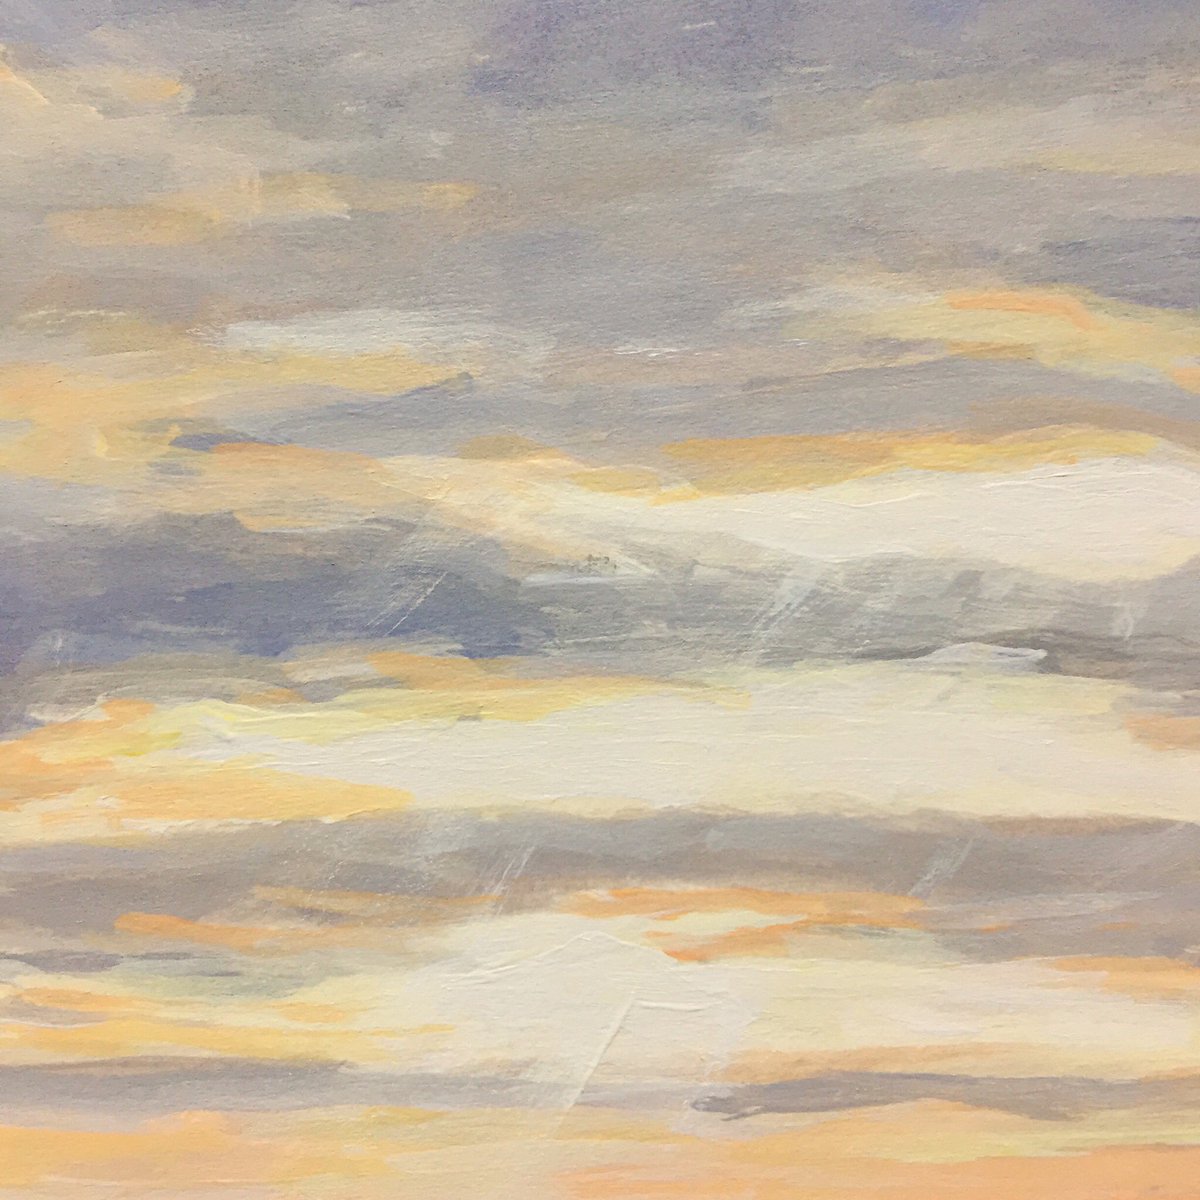 A detail from my latest WIP of a Cornish sunset 🌅 
#sunset #sunsetpainting #cornishsunset #cornwall #kernow #acrylic #acrylicpainting